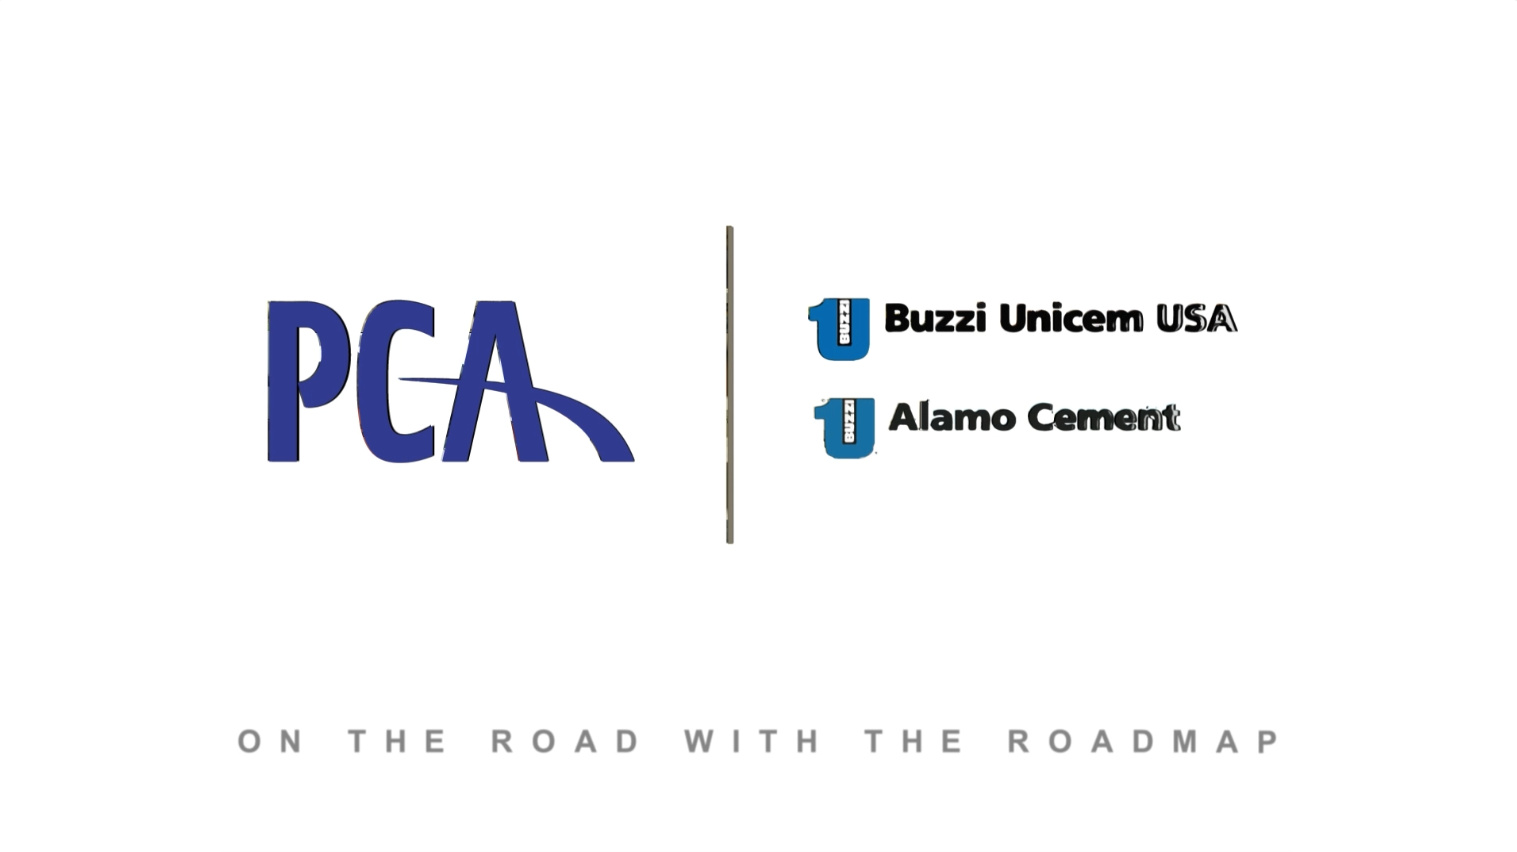 Massimo Toso of Buzzi Unicem USA – On the Road with the Roadmap